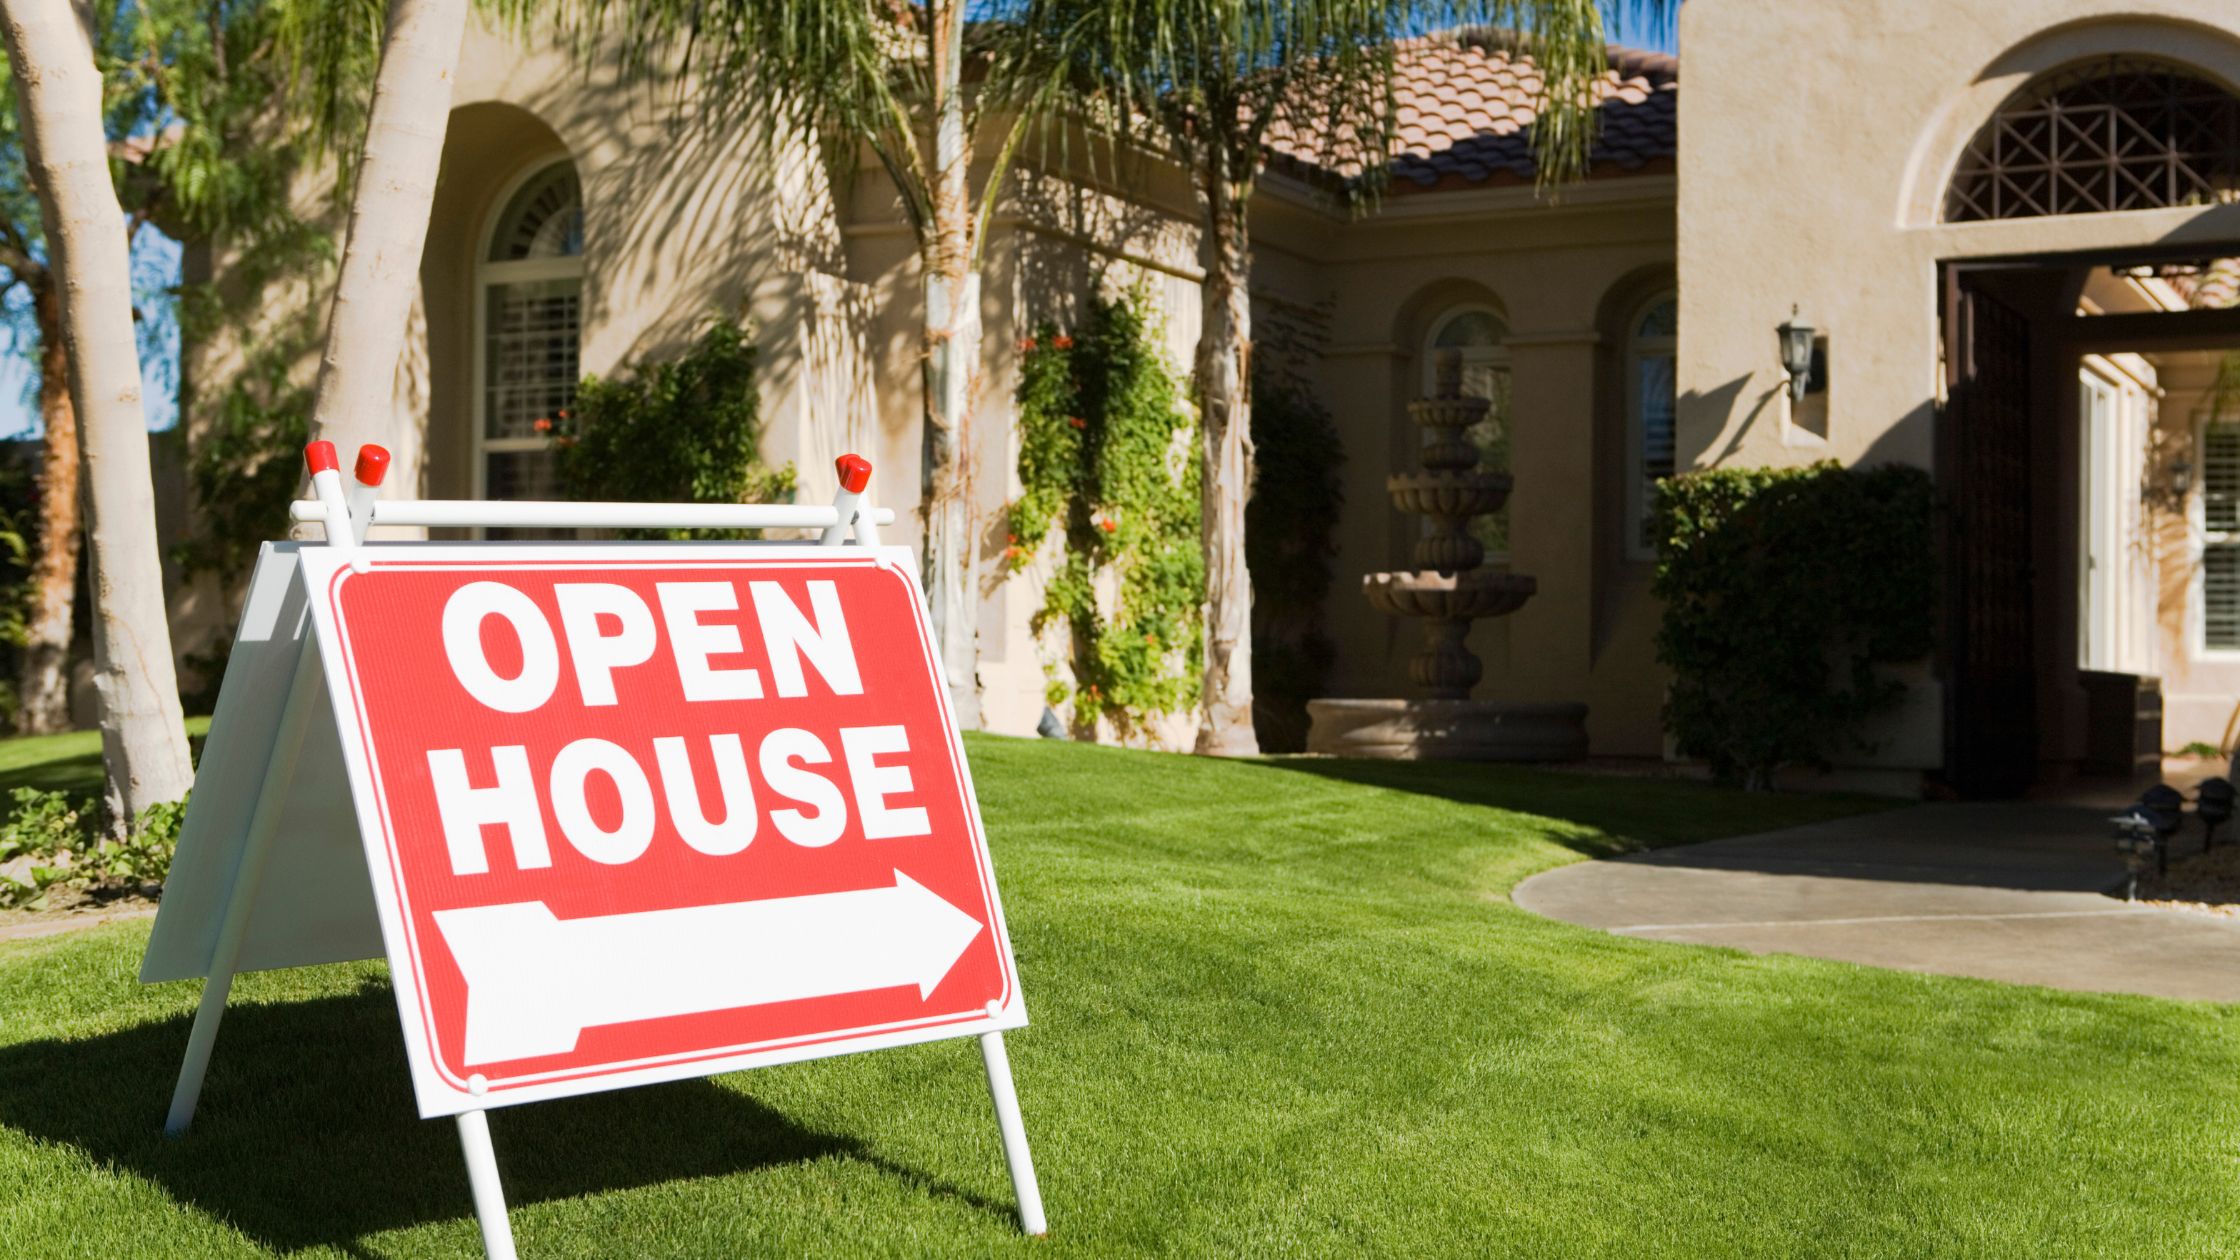 Open house tips for buyers Sign- Real Estate Juan C